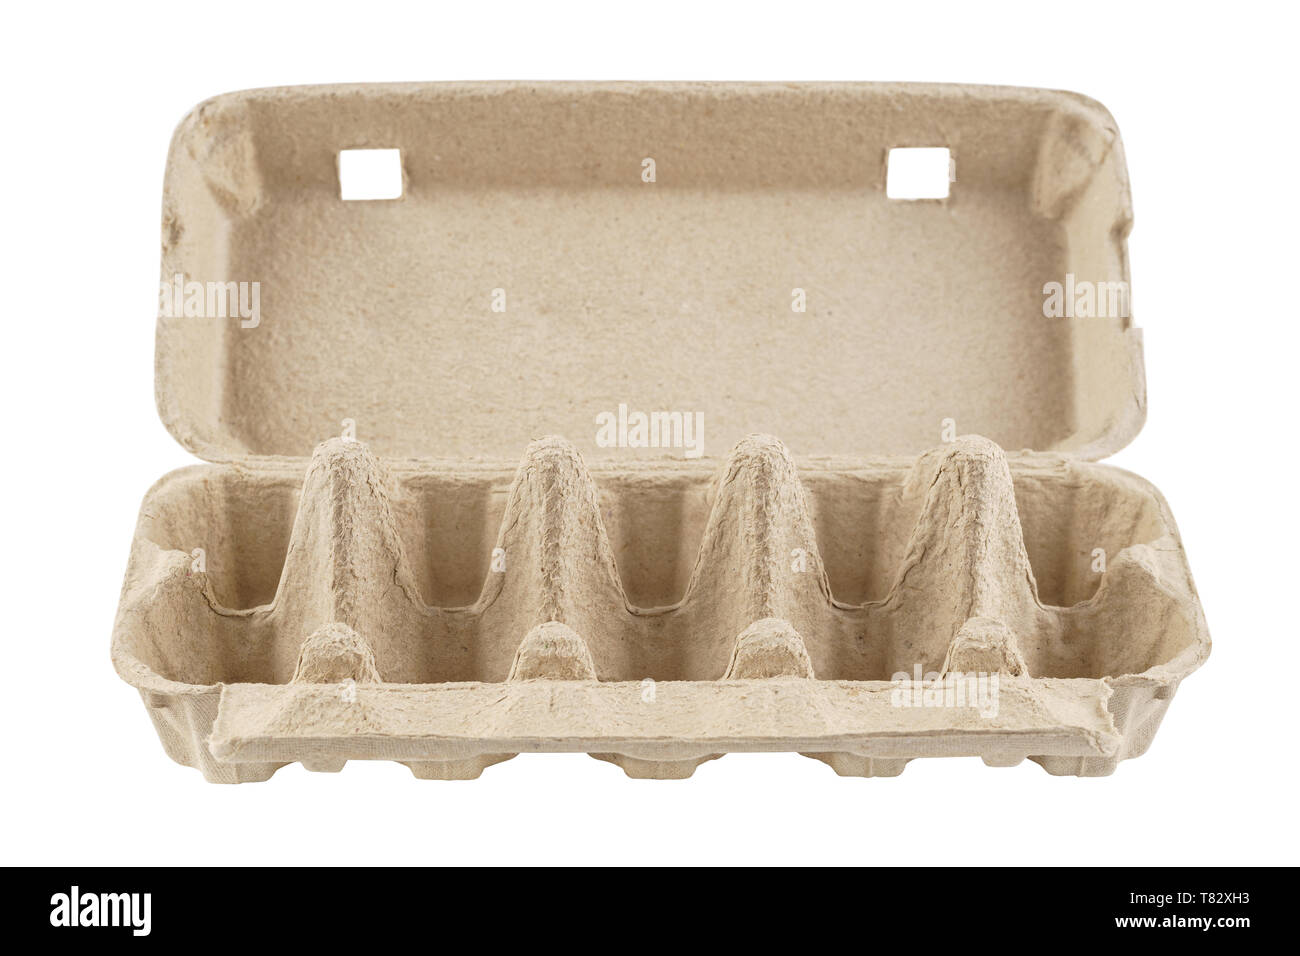 Empty Egg Carton Box Tray Or Container Isolated On White Recyclable Cardboard Or Paper Packaging Front View Stock Photo Alamy